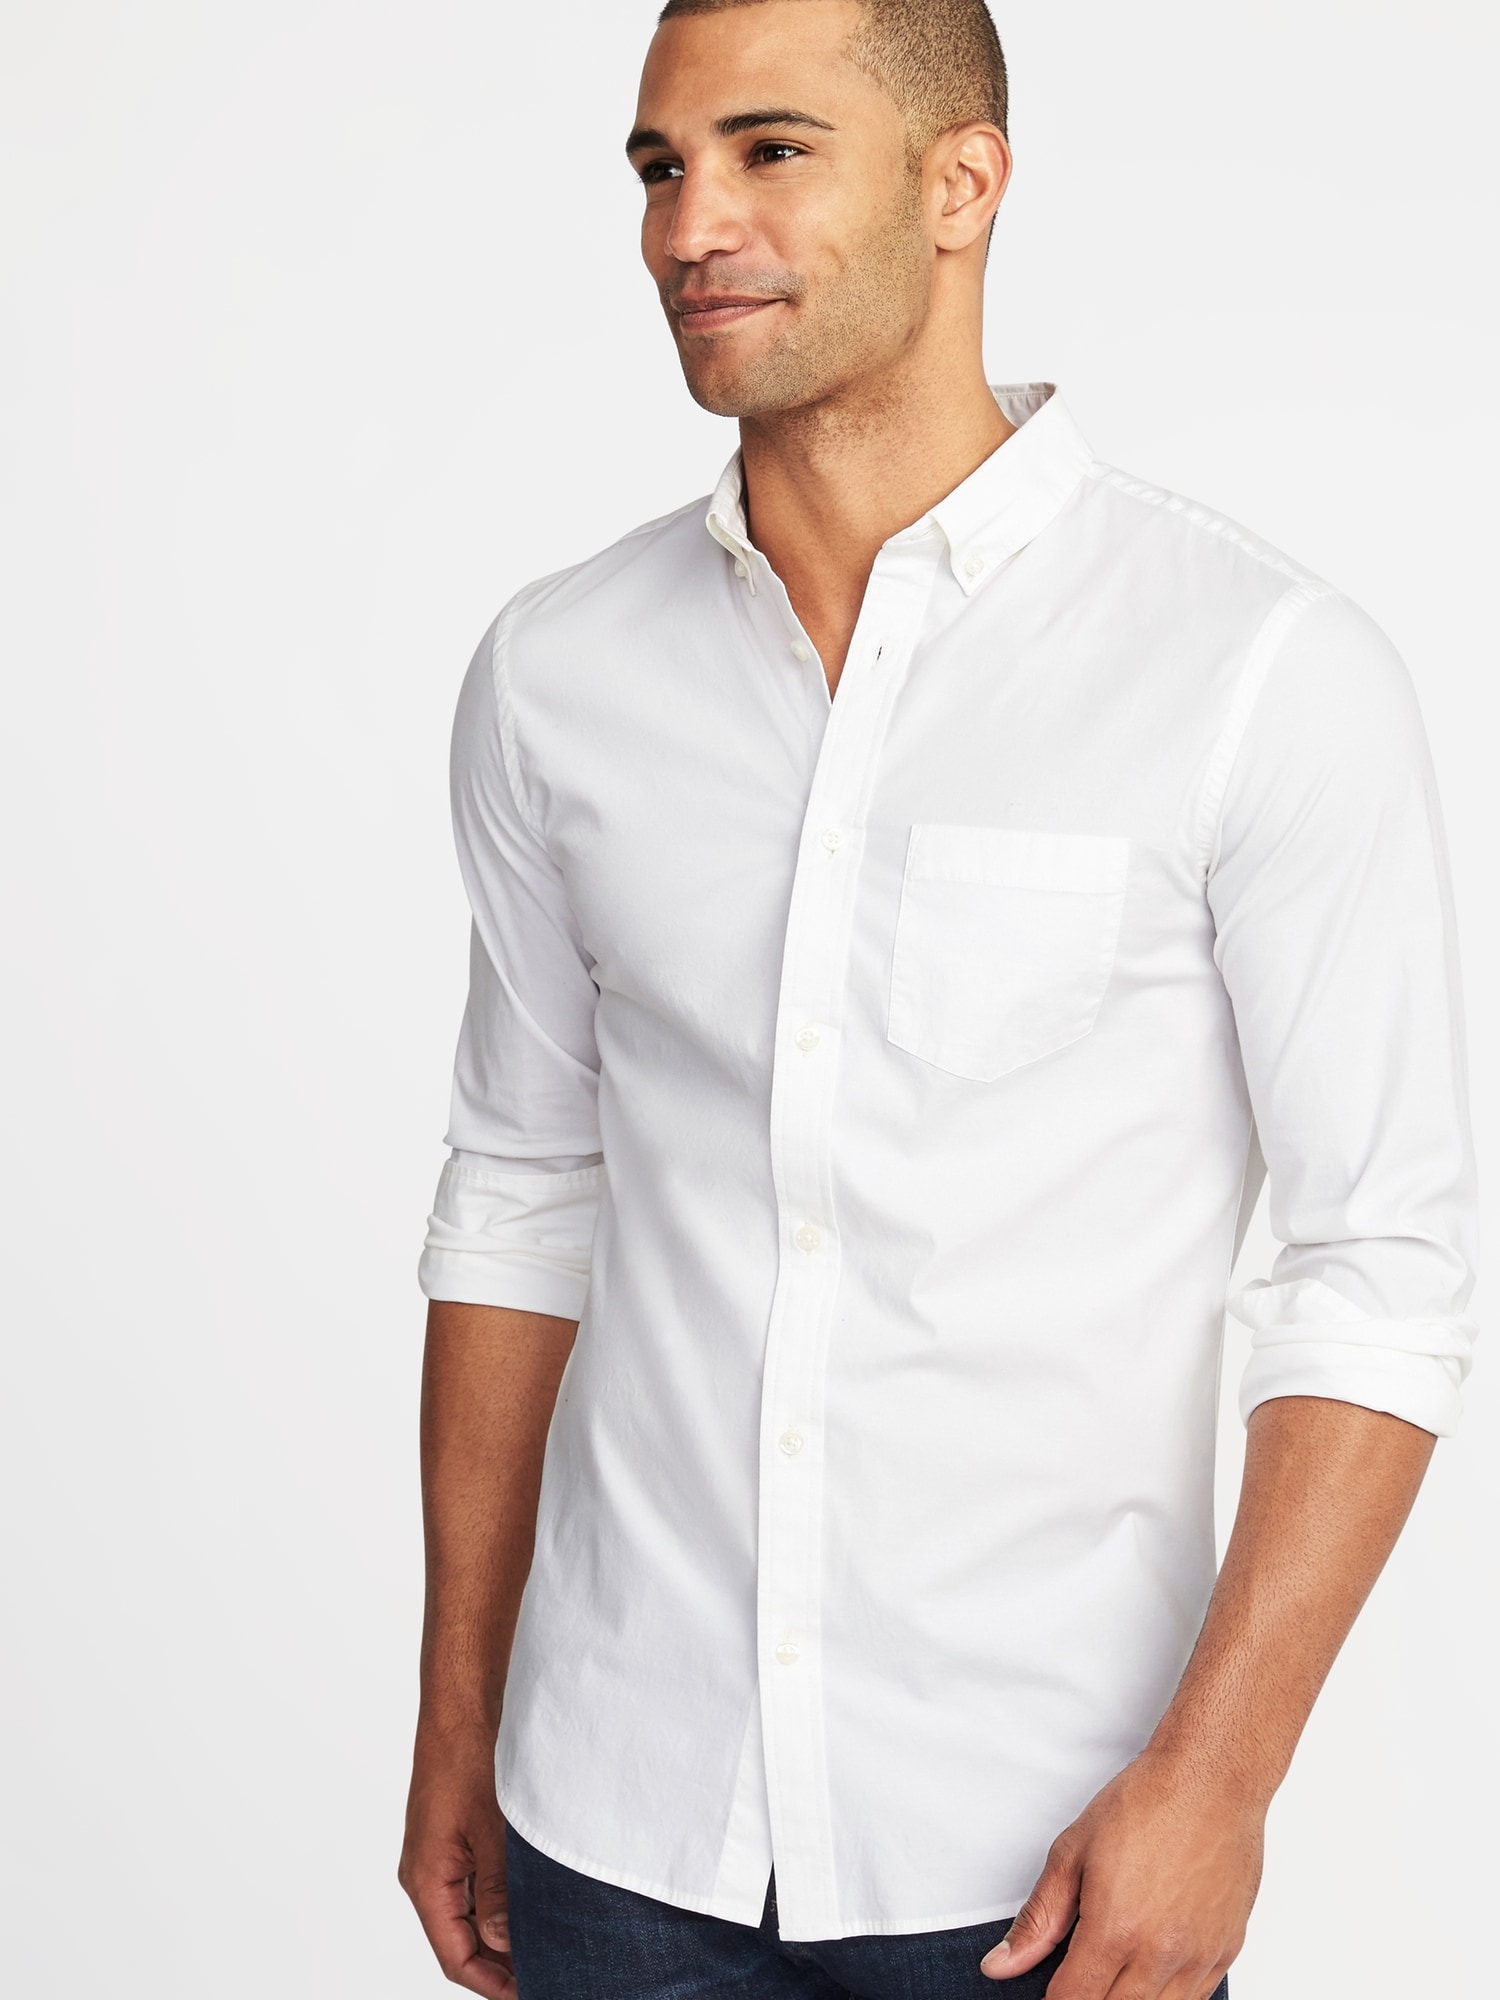 old navy slim fit shirts